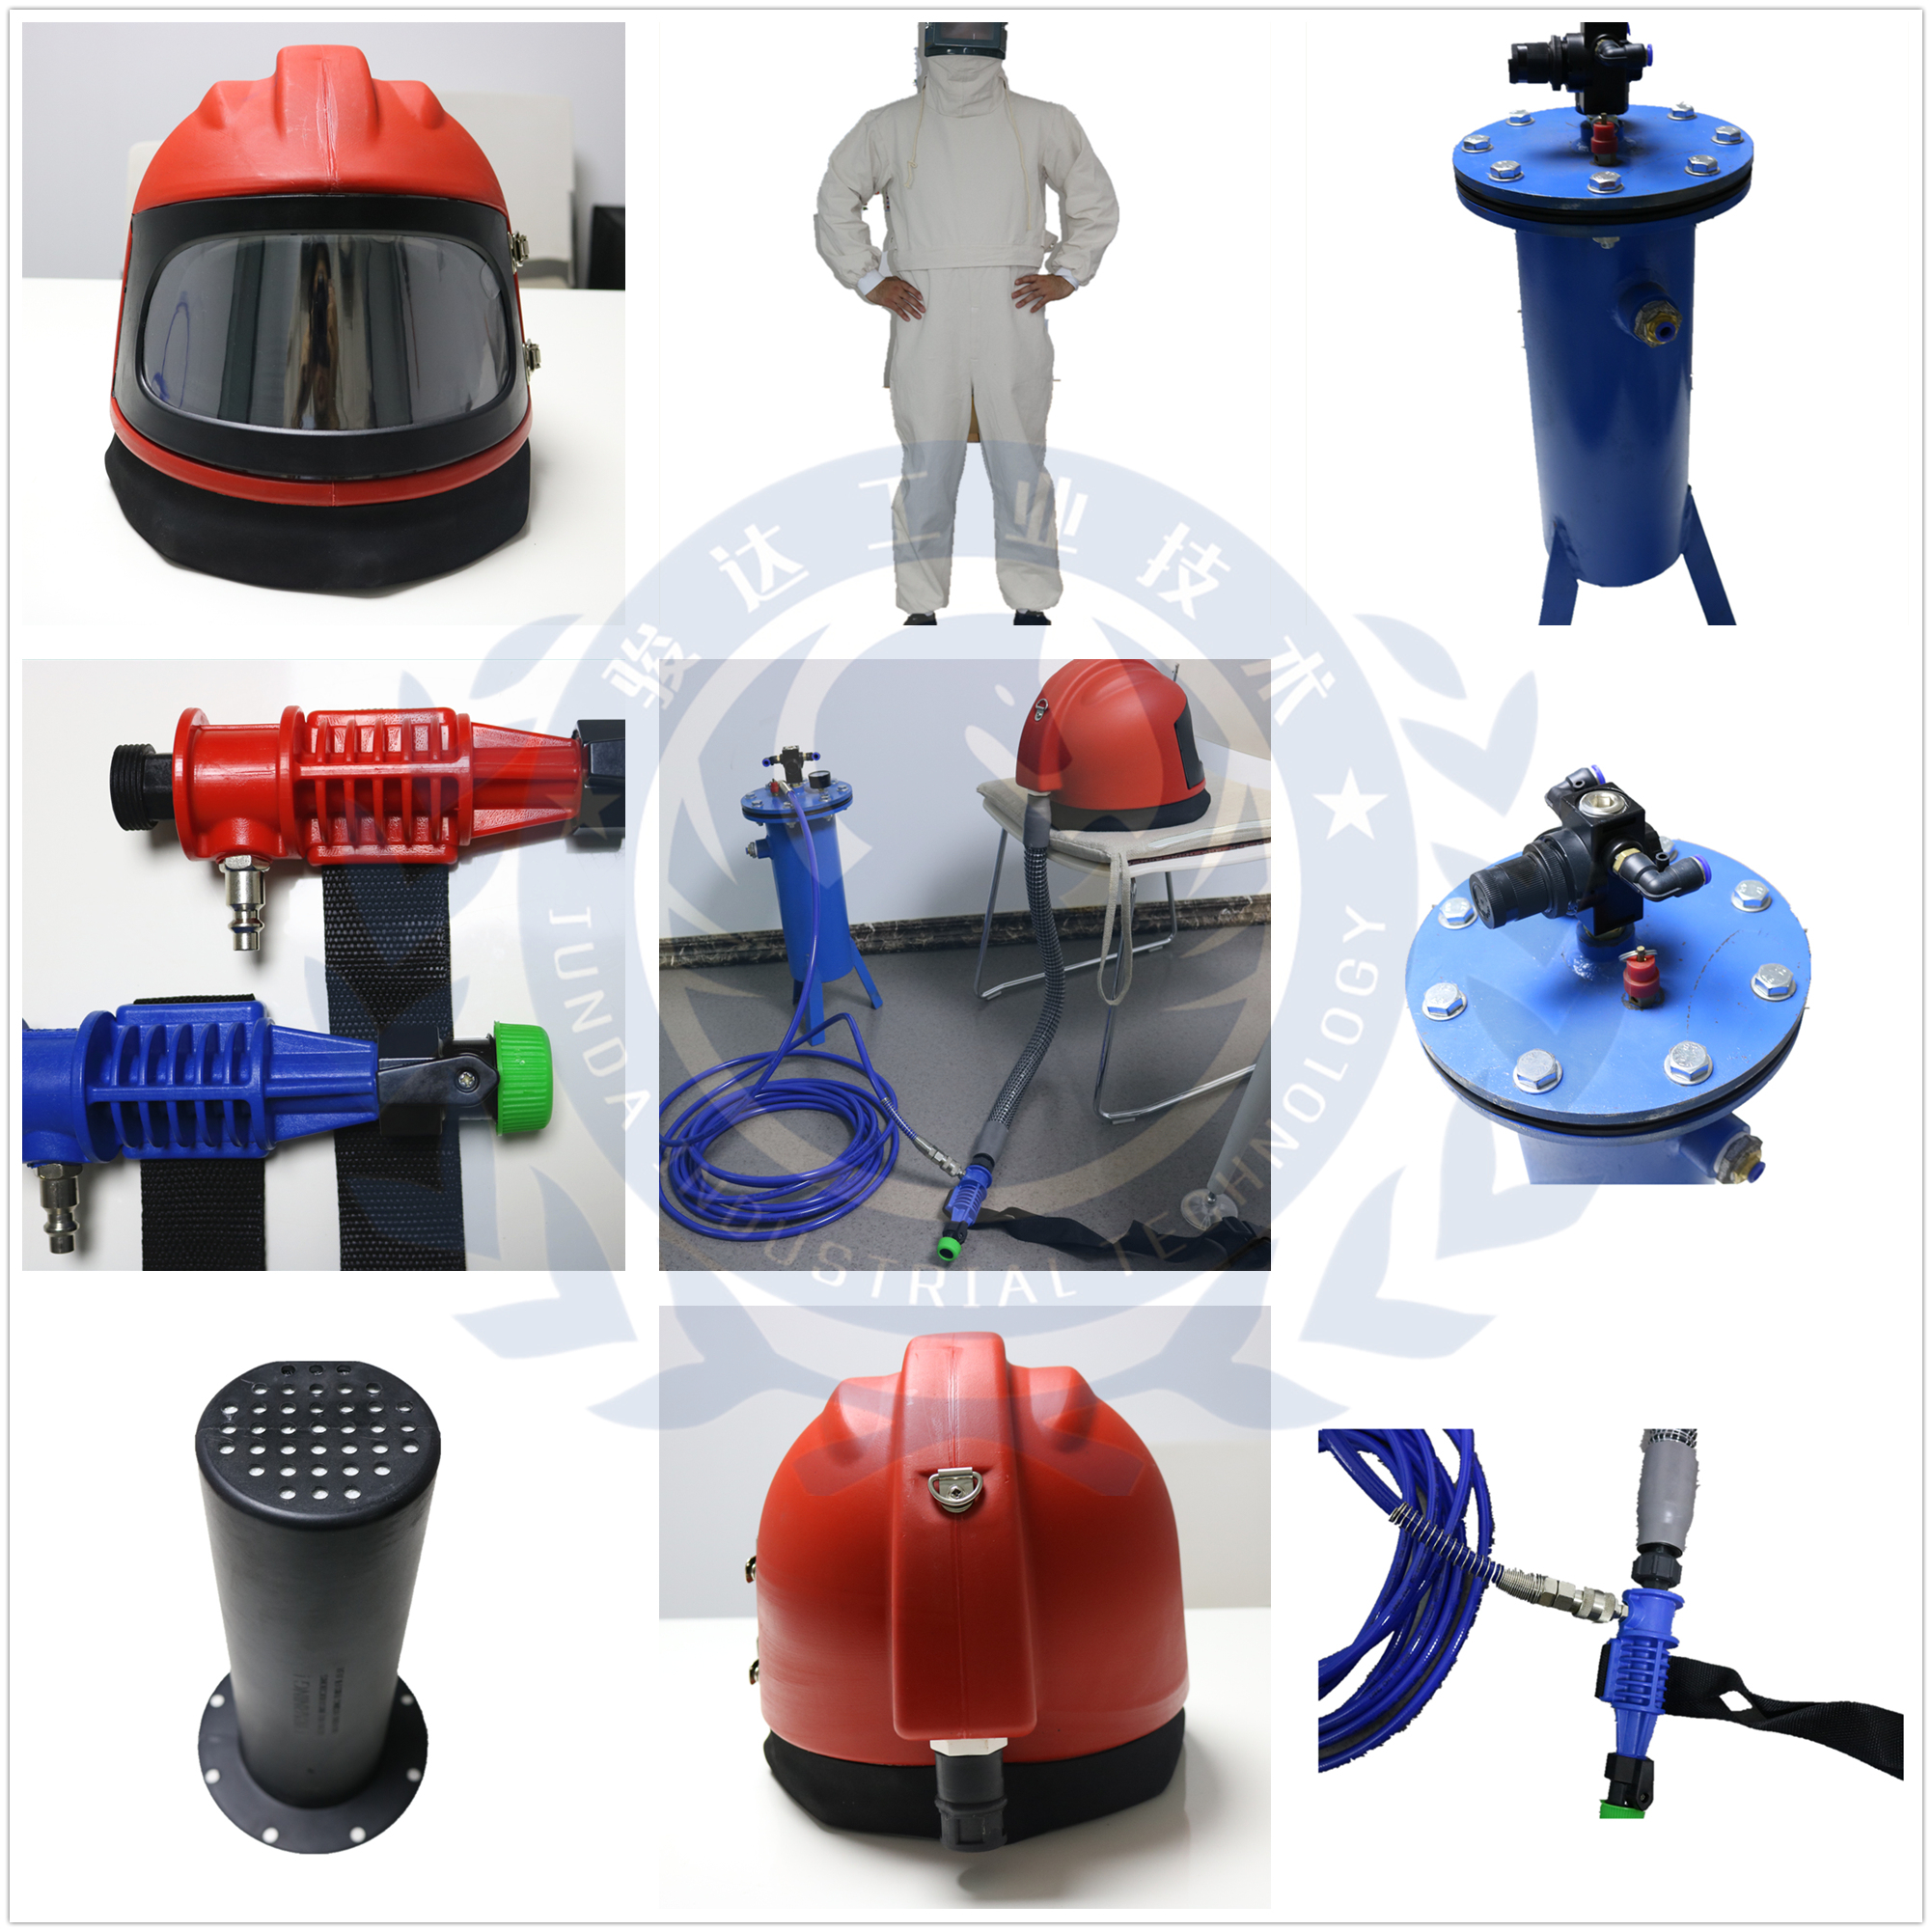 New products of sand blasting protective equipment series